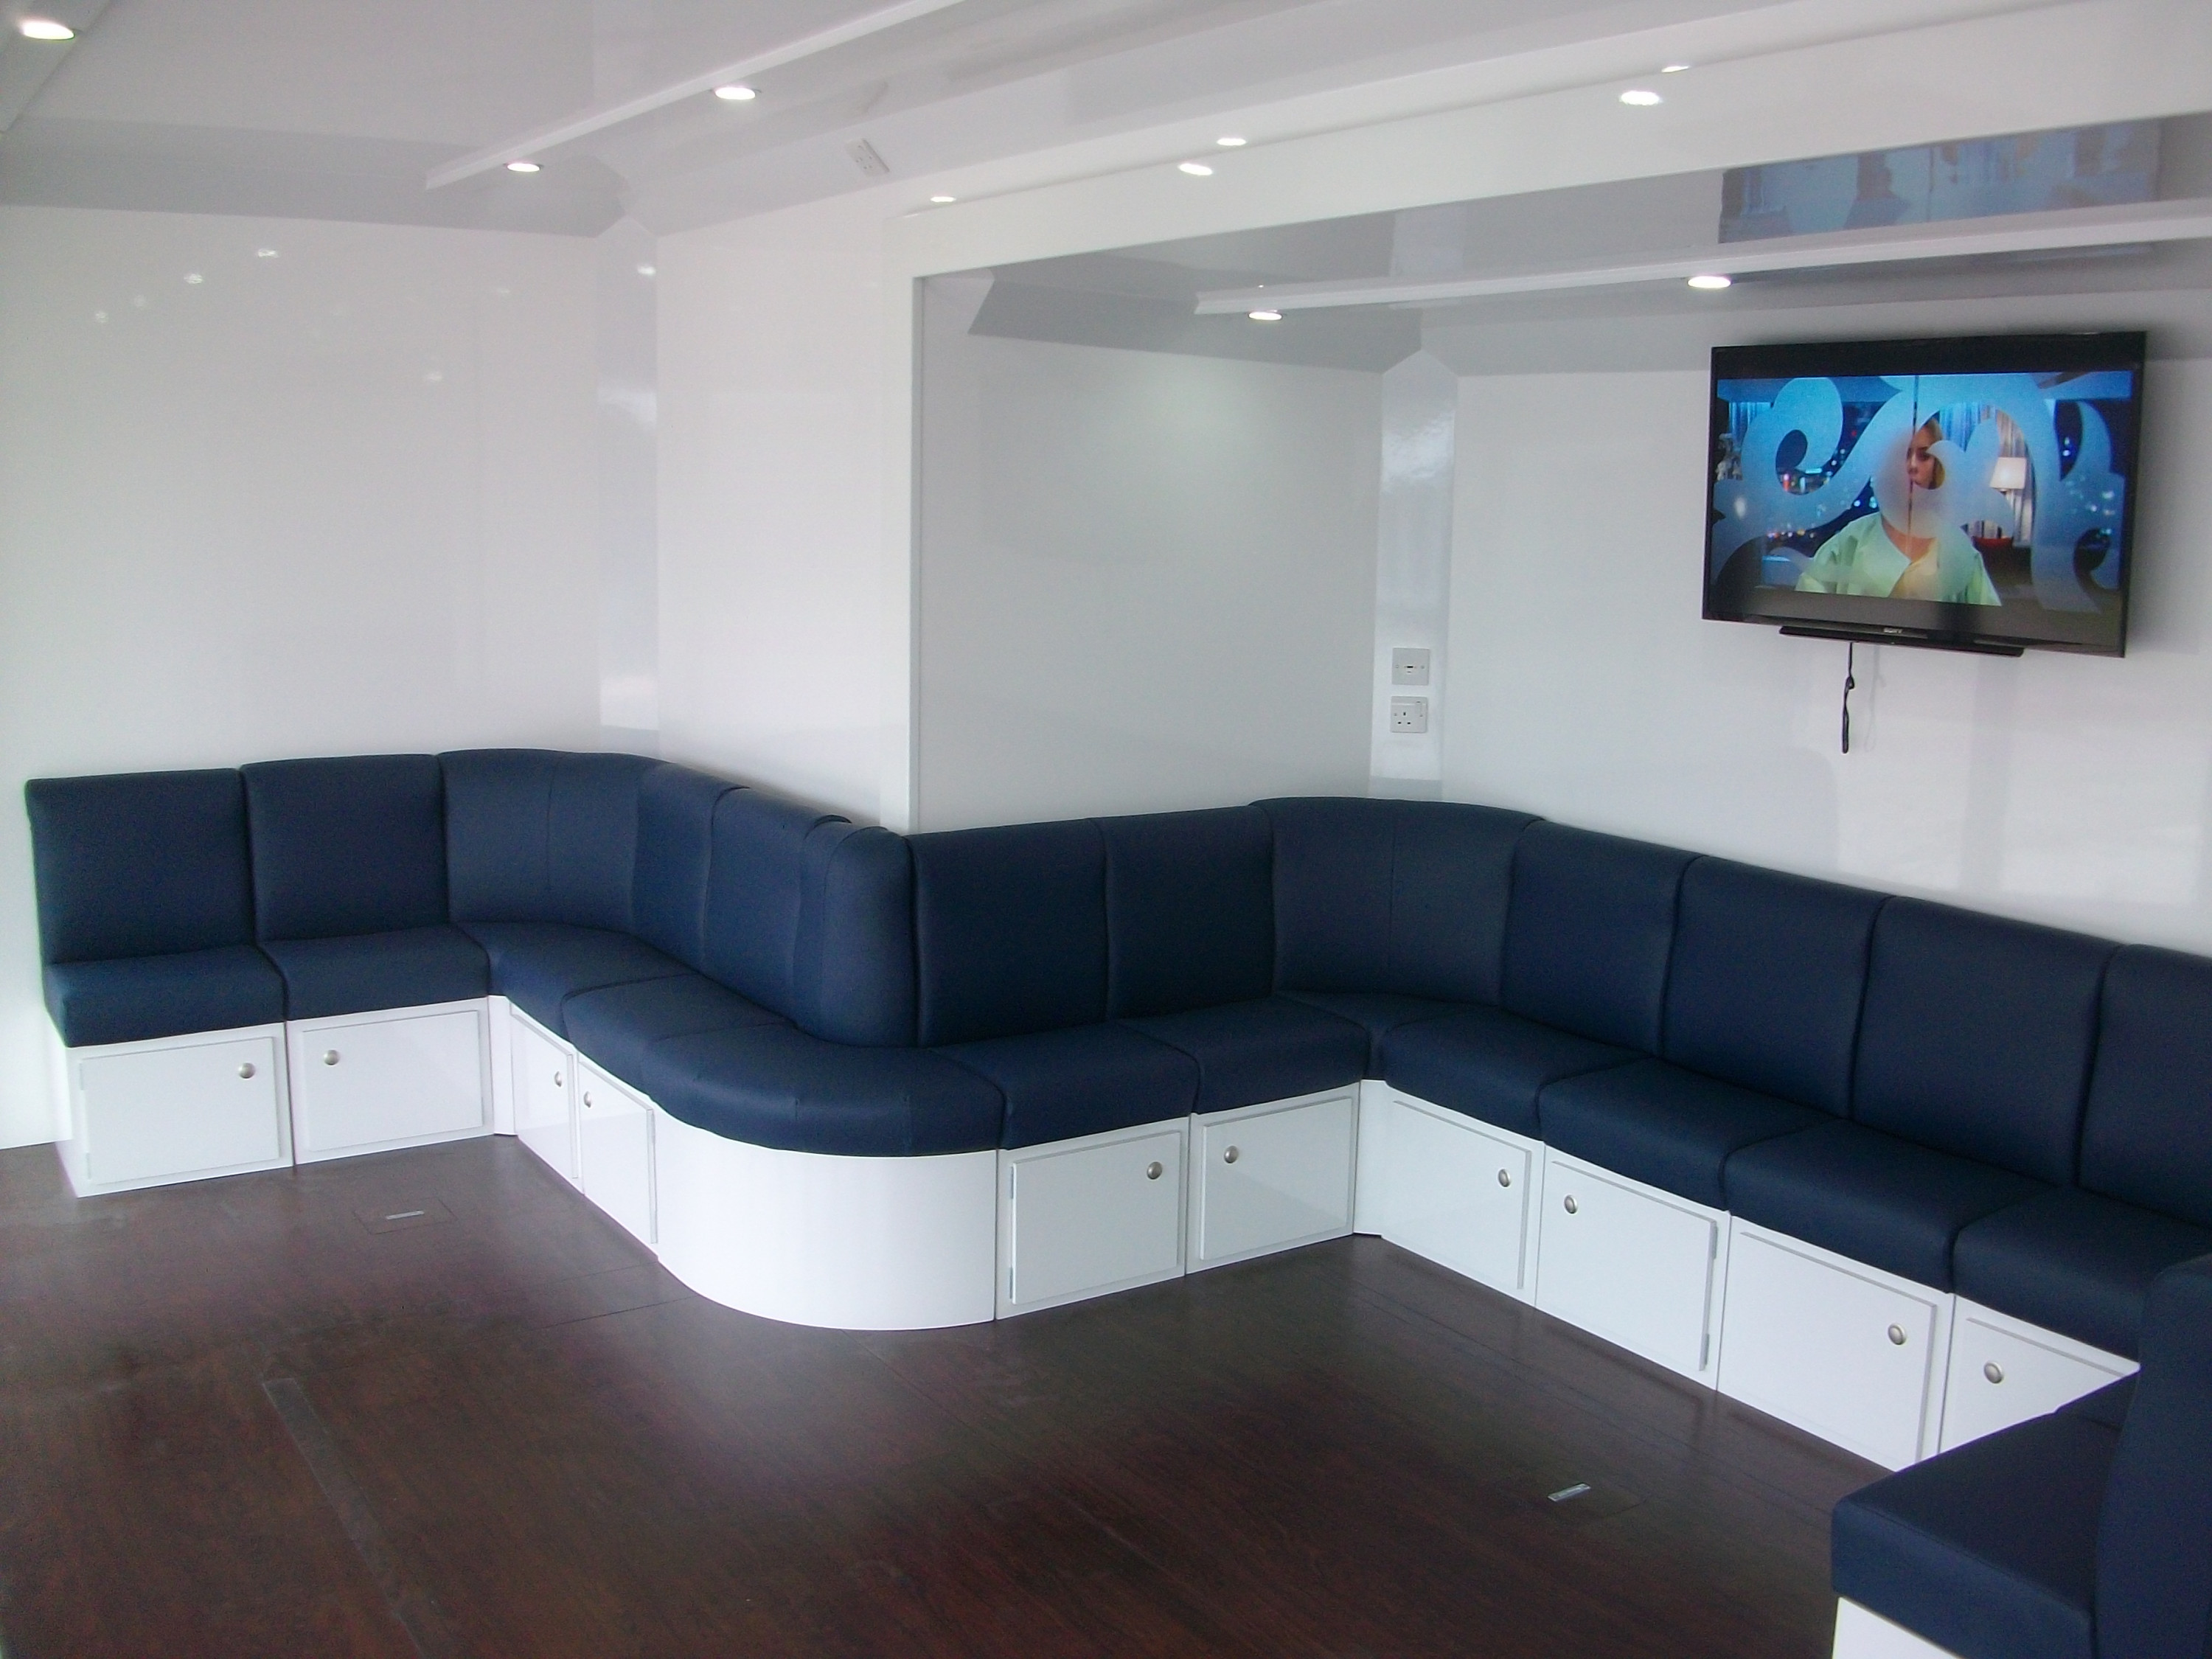 Maserati Modular seating laid out in hospitality mode